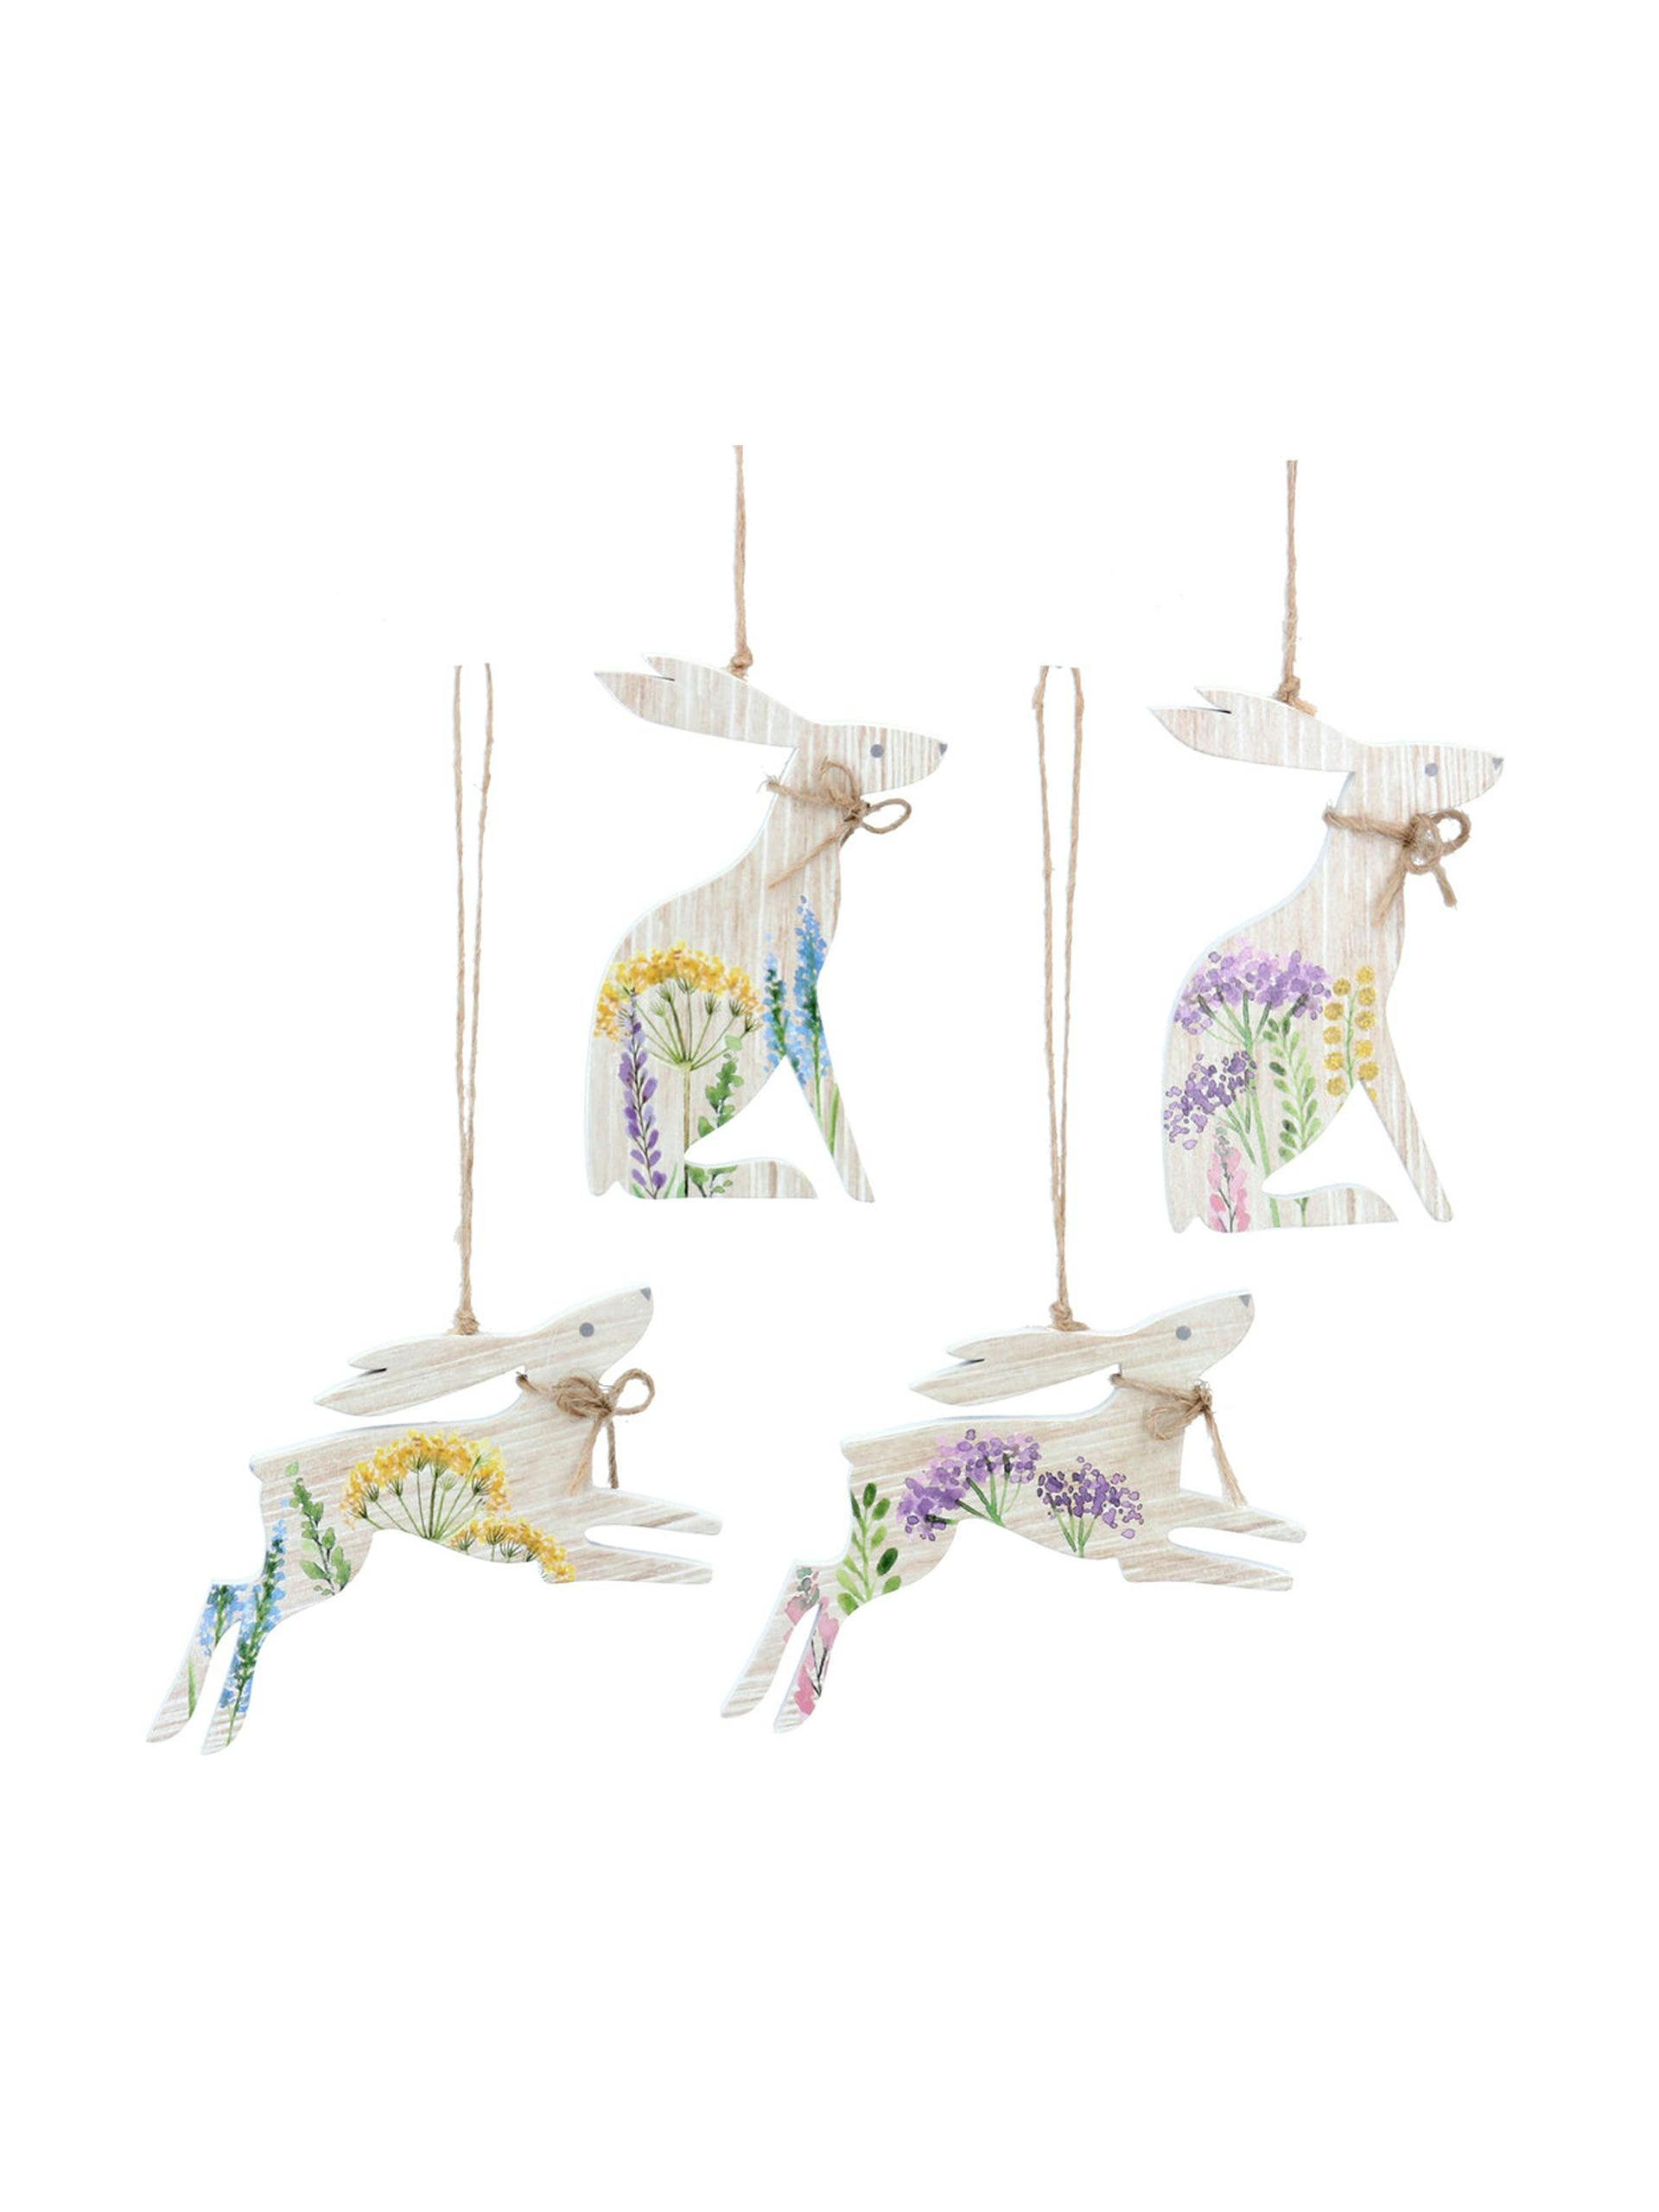 Hare decorations (set of 4)